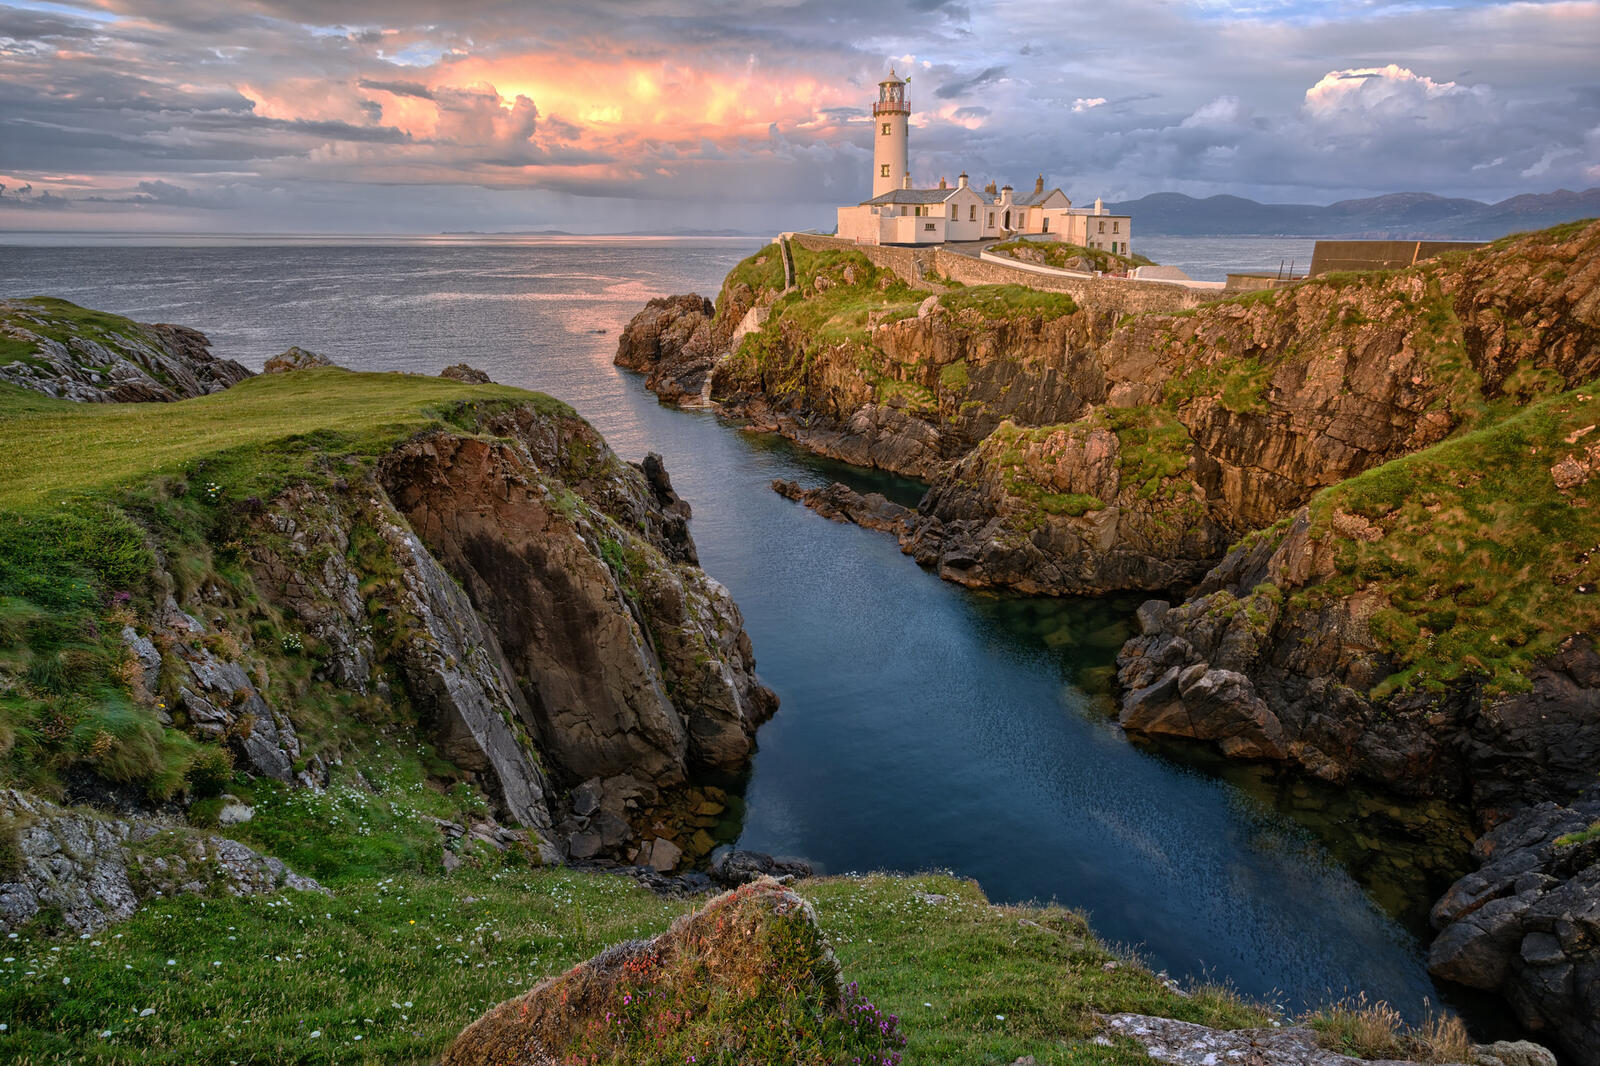 Wallpapers Fanad Peninsula County Donegal Ireland on the desktop